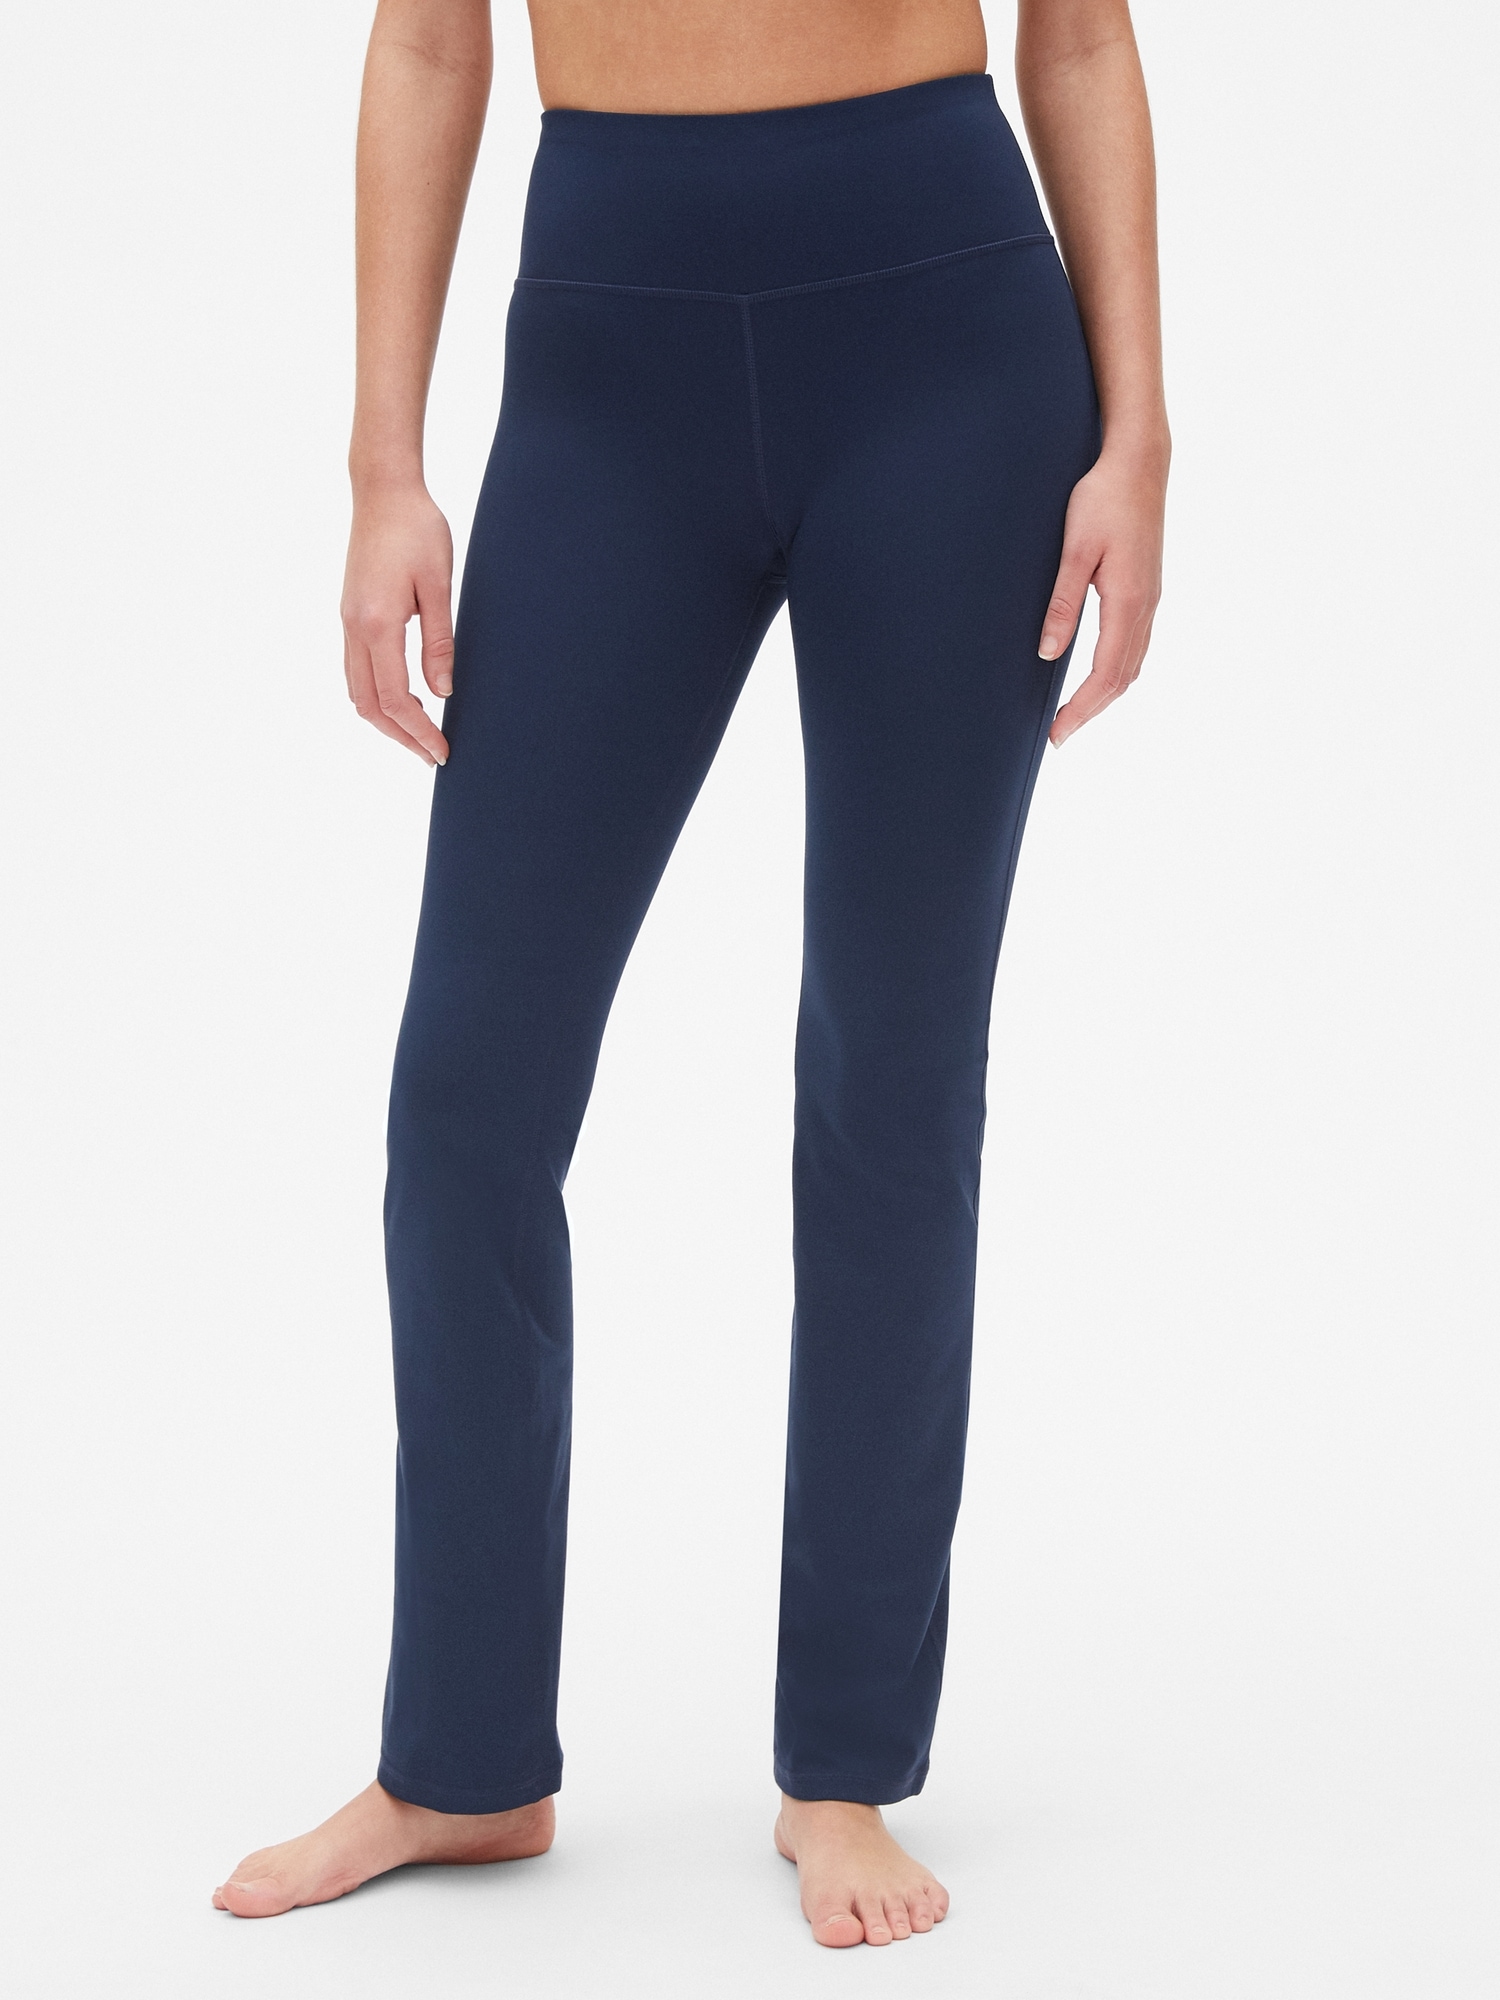 Dance studio joggers just came in! I'm wearing a size 4 (usual size). I'm  5'2”. Definitely feels loose all around. : r/lululemon